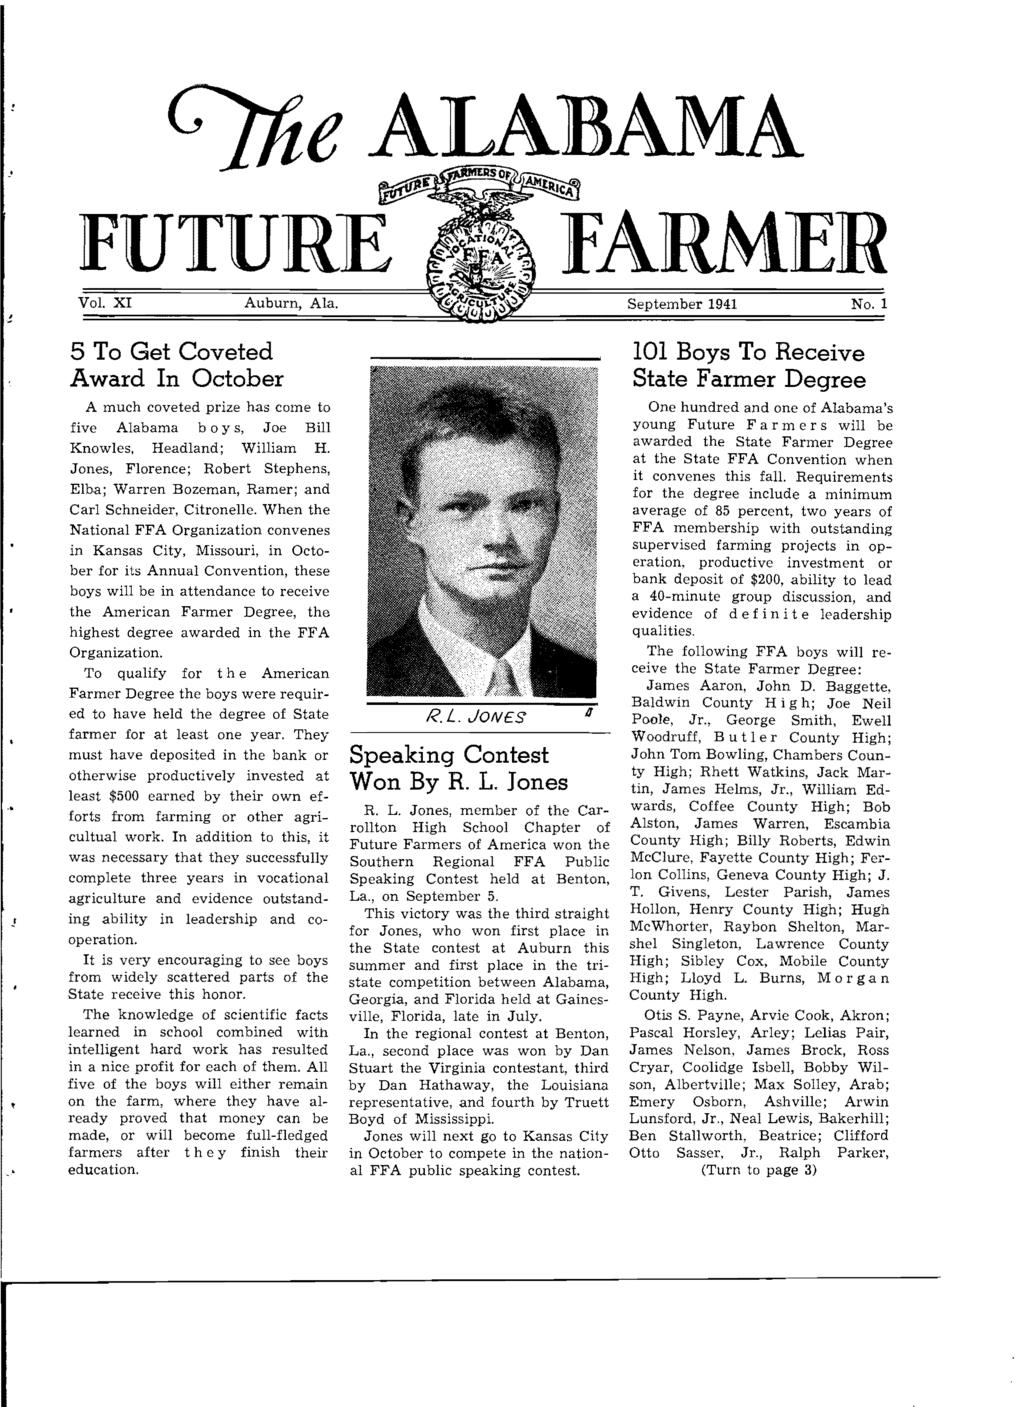 ealabama -' FUTURE FARMER Vol. XI Auburn, Ala. September 41 No.1! 5 To Get Coveted Award In October A much coveted prize has come to five Alabama boy s, Joe Bill Knowles, Headland; William H.